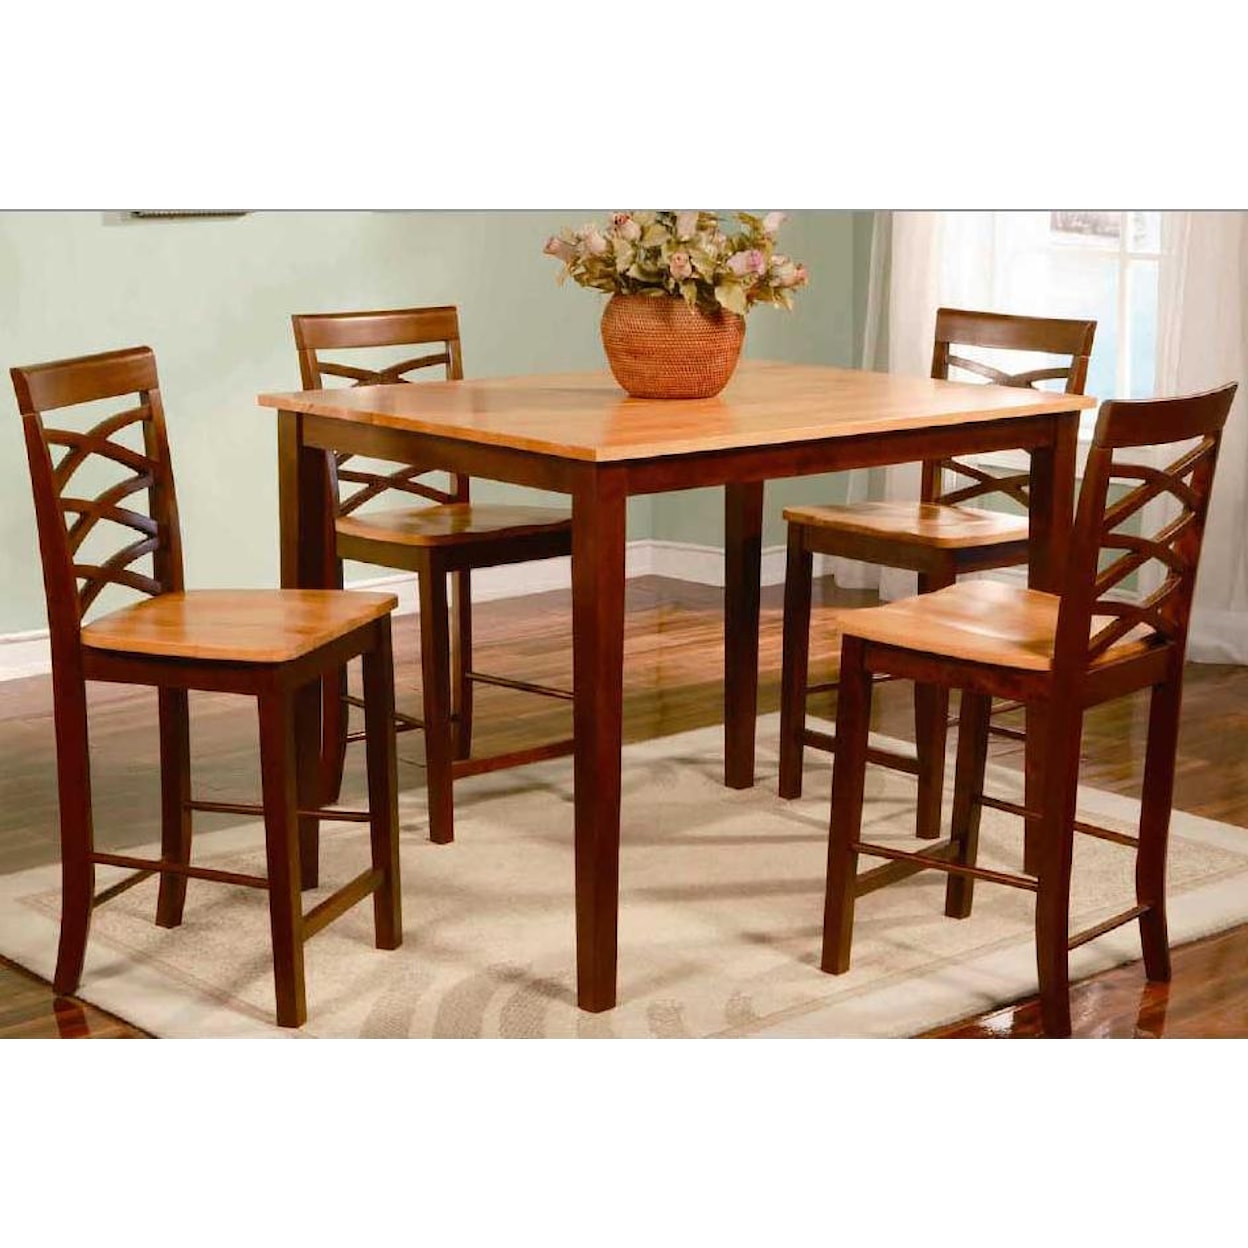 Primo International 1553 Counter Height Table and Chairs